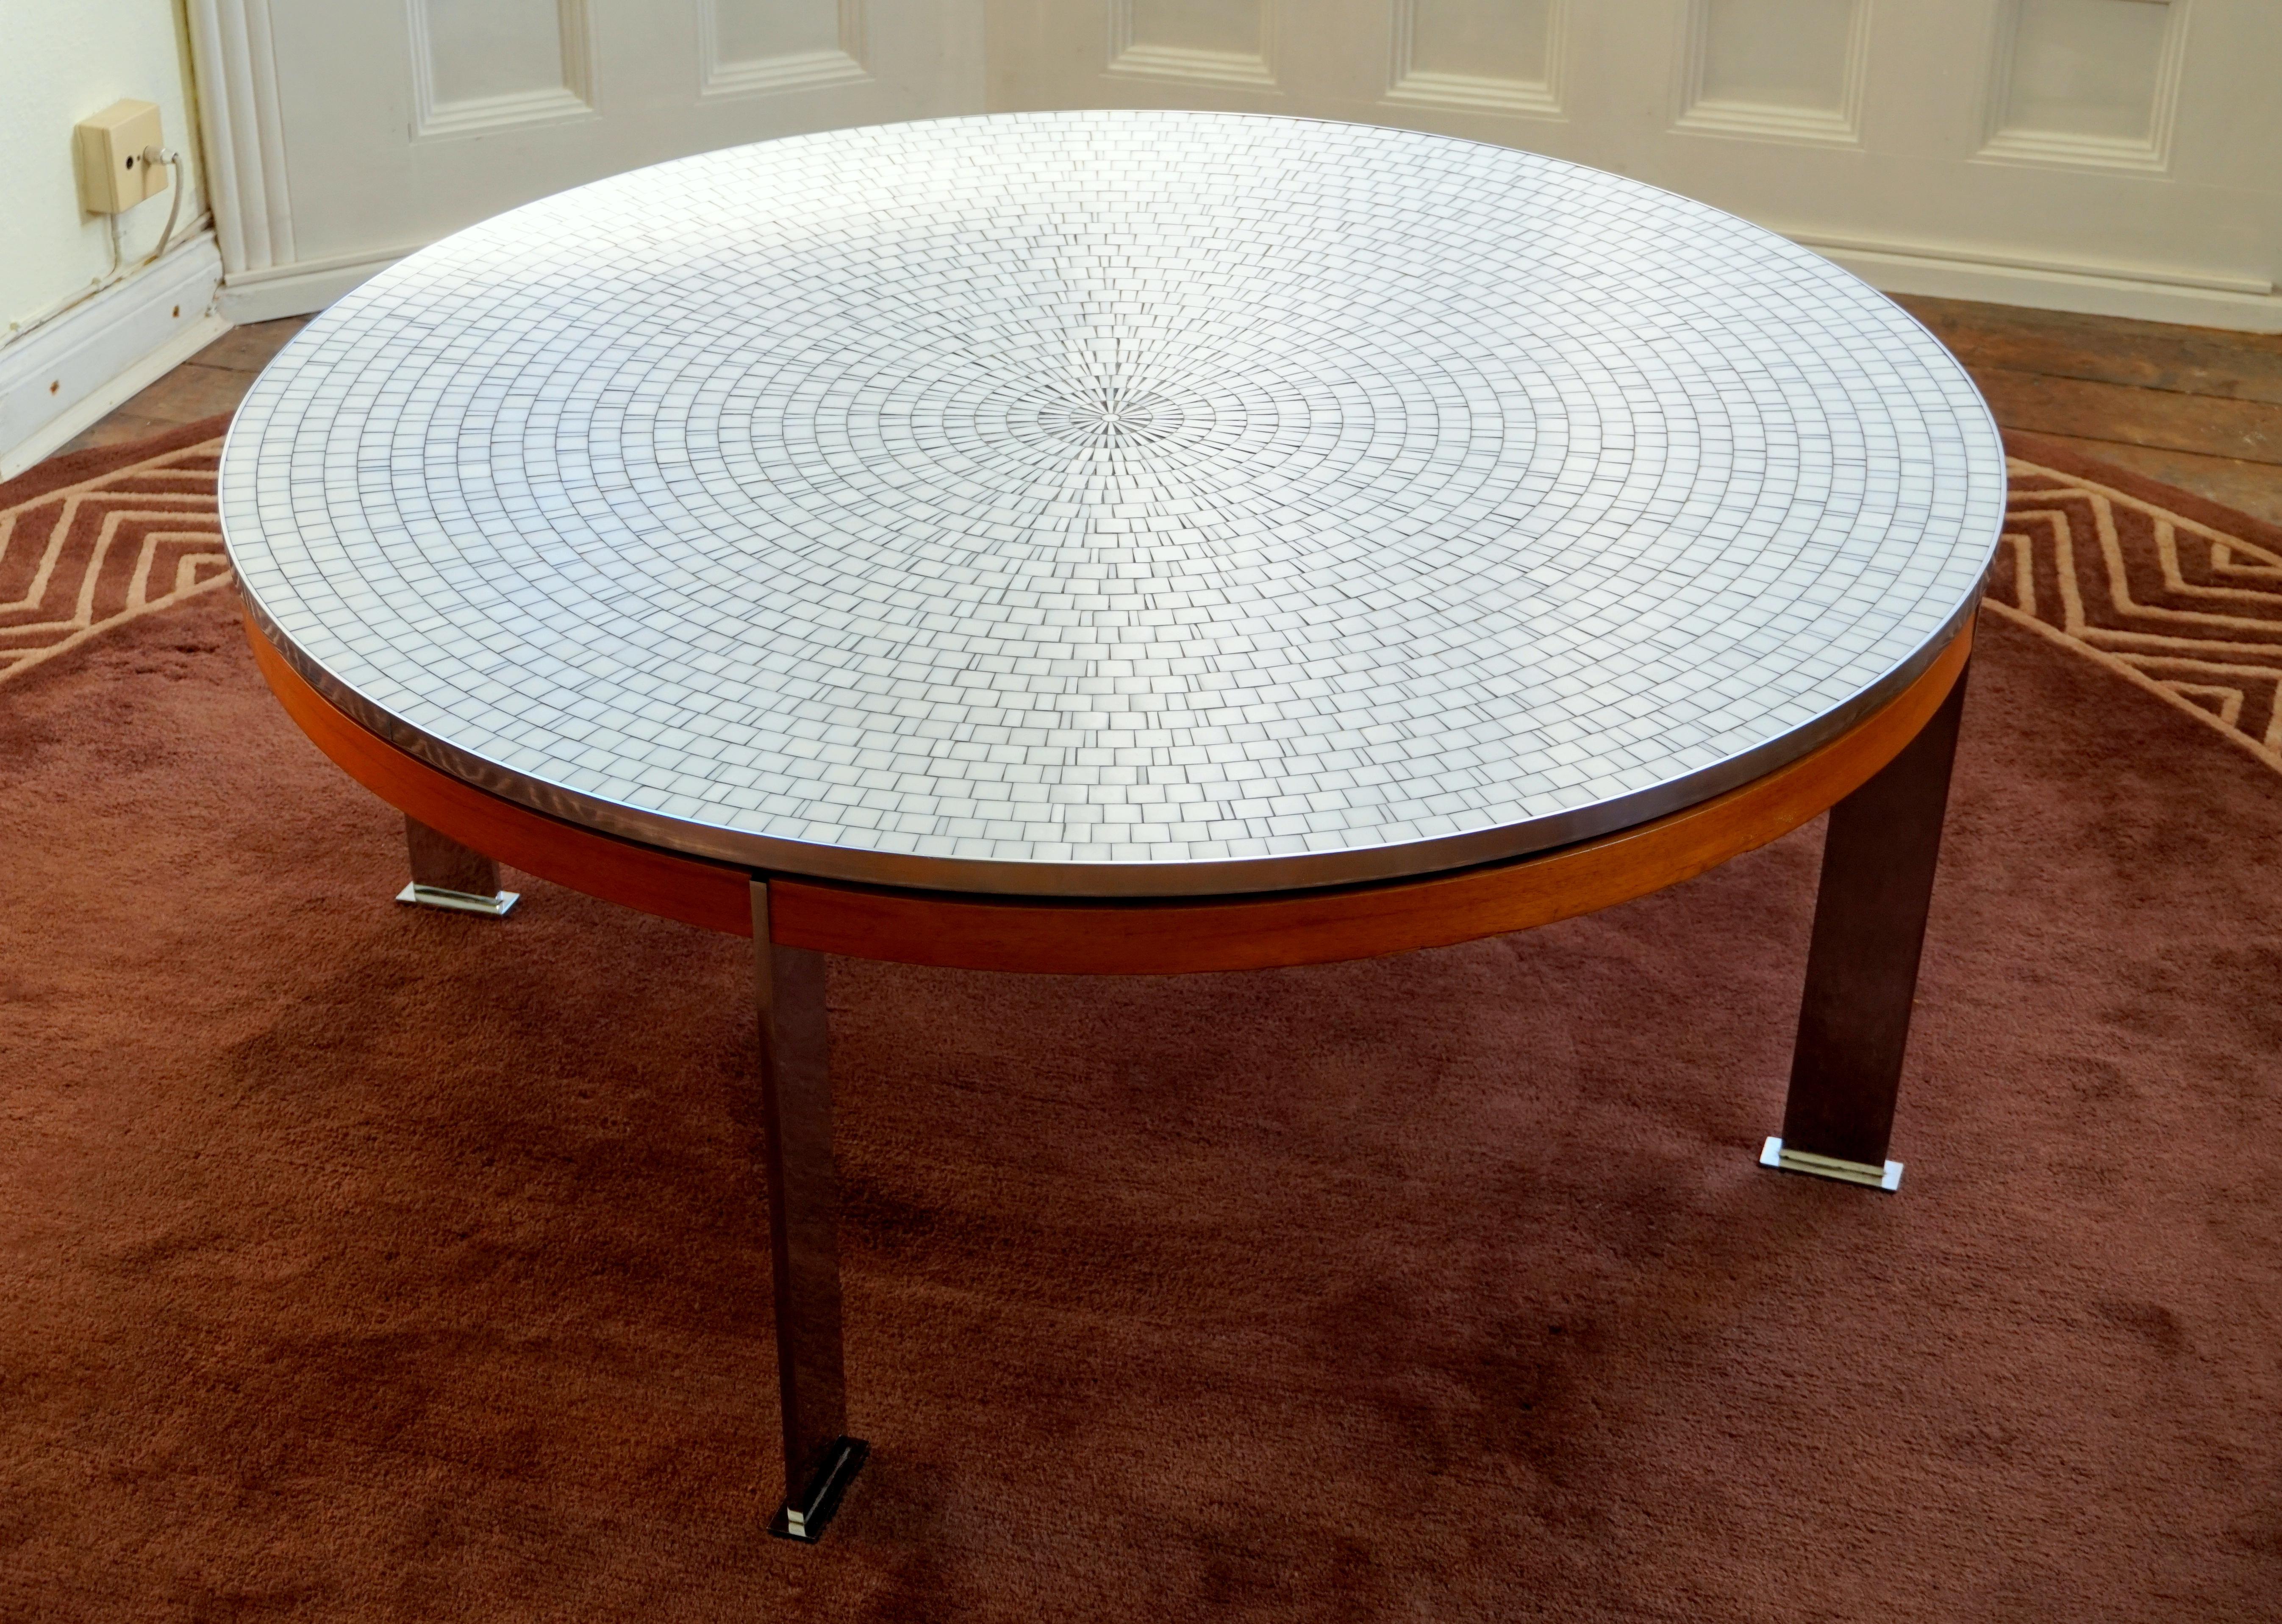 Berthold Müller Oerlinghausen Midcentury Mosaic Large Round Coffee Table, 1960s In Good Condition For Sale In Halle, DE